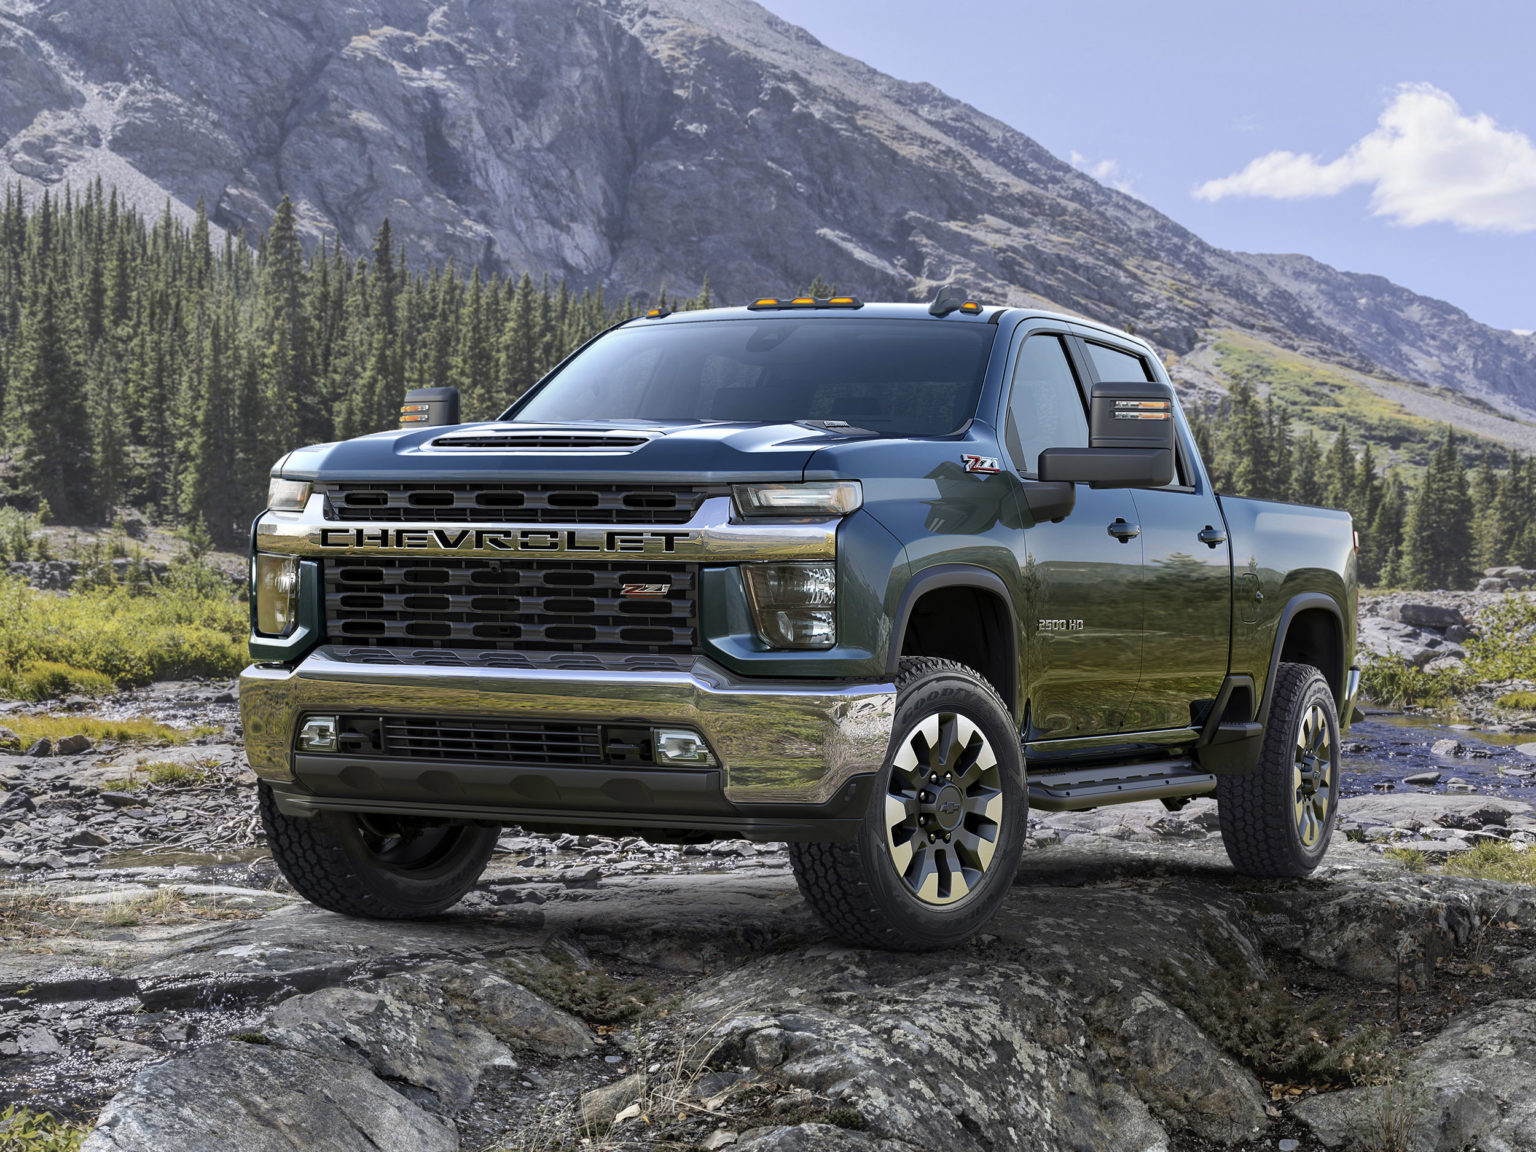 It's not just the Big Three making trucks that people want to buy.